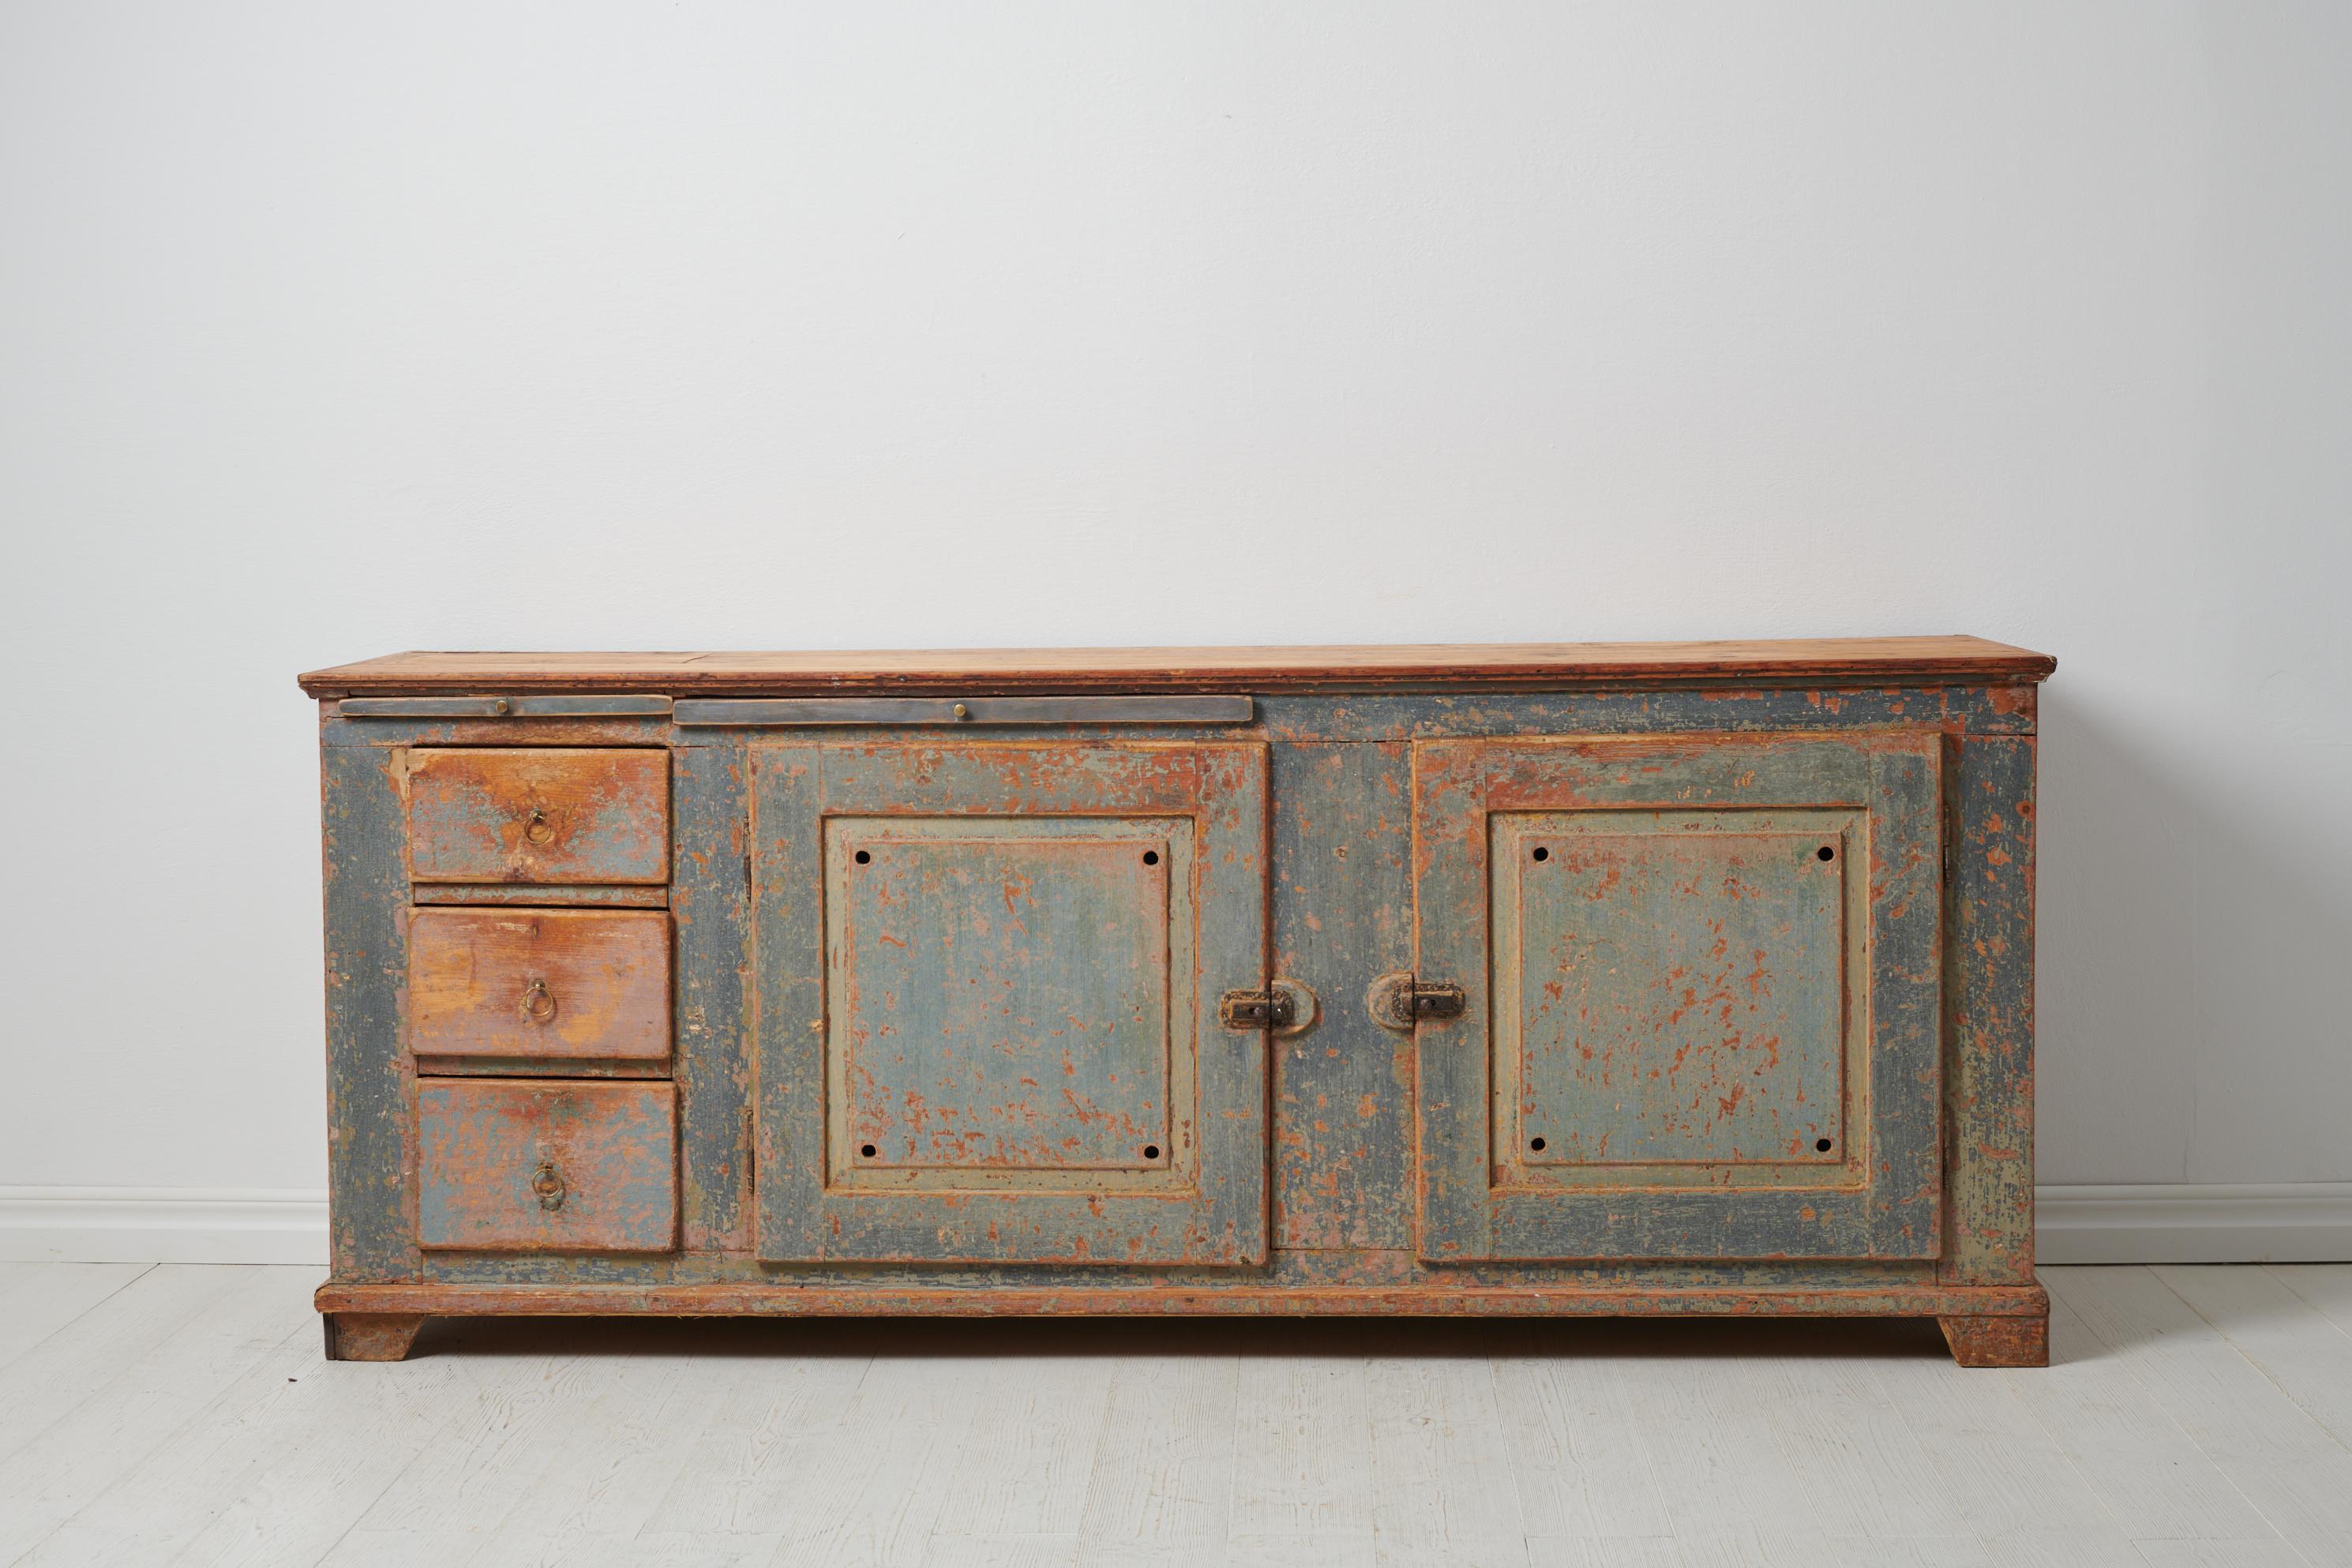 Low and wide genuine sideboard from the mid 1800s. The sideboard is a genuine Swedish country house furniture made in painted pine. It has been dry scraped by hand down to old historic paint. Genuine rustic surface with traces after use. The table